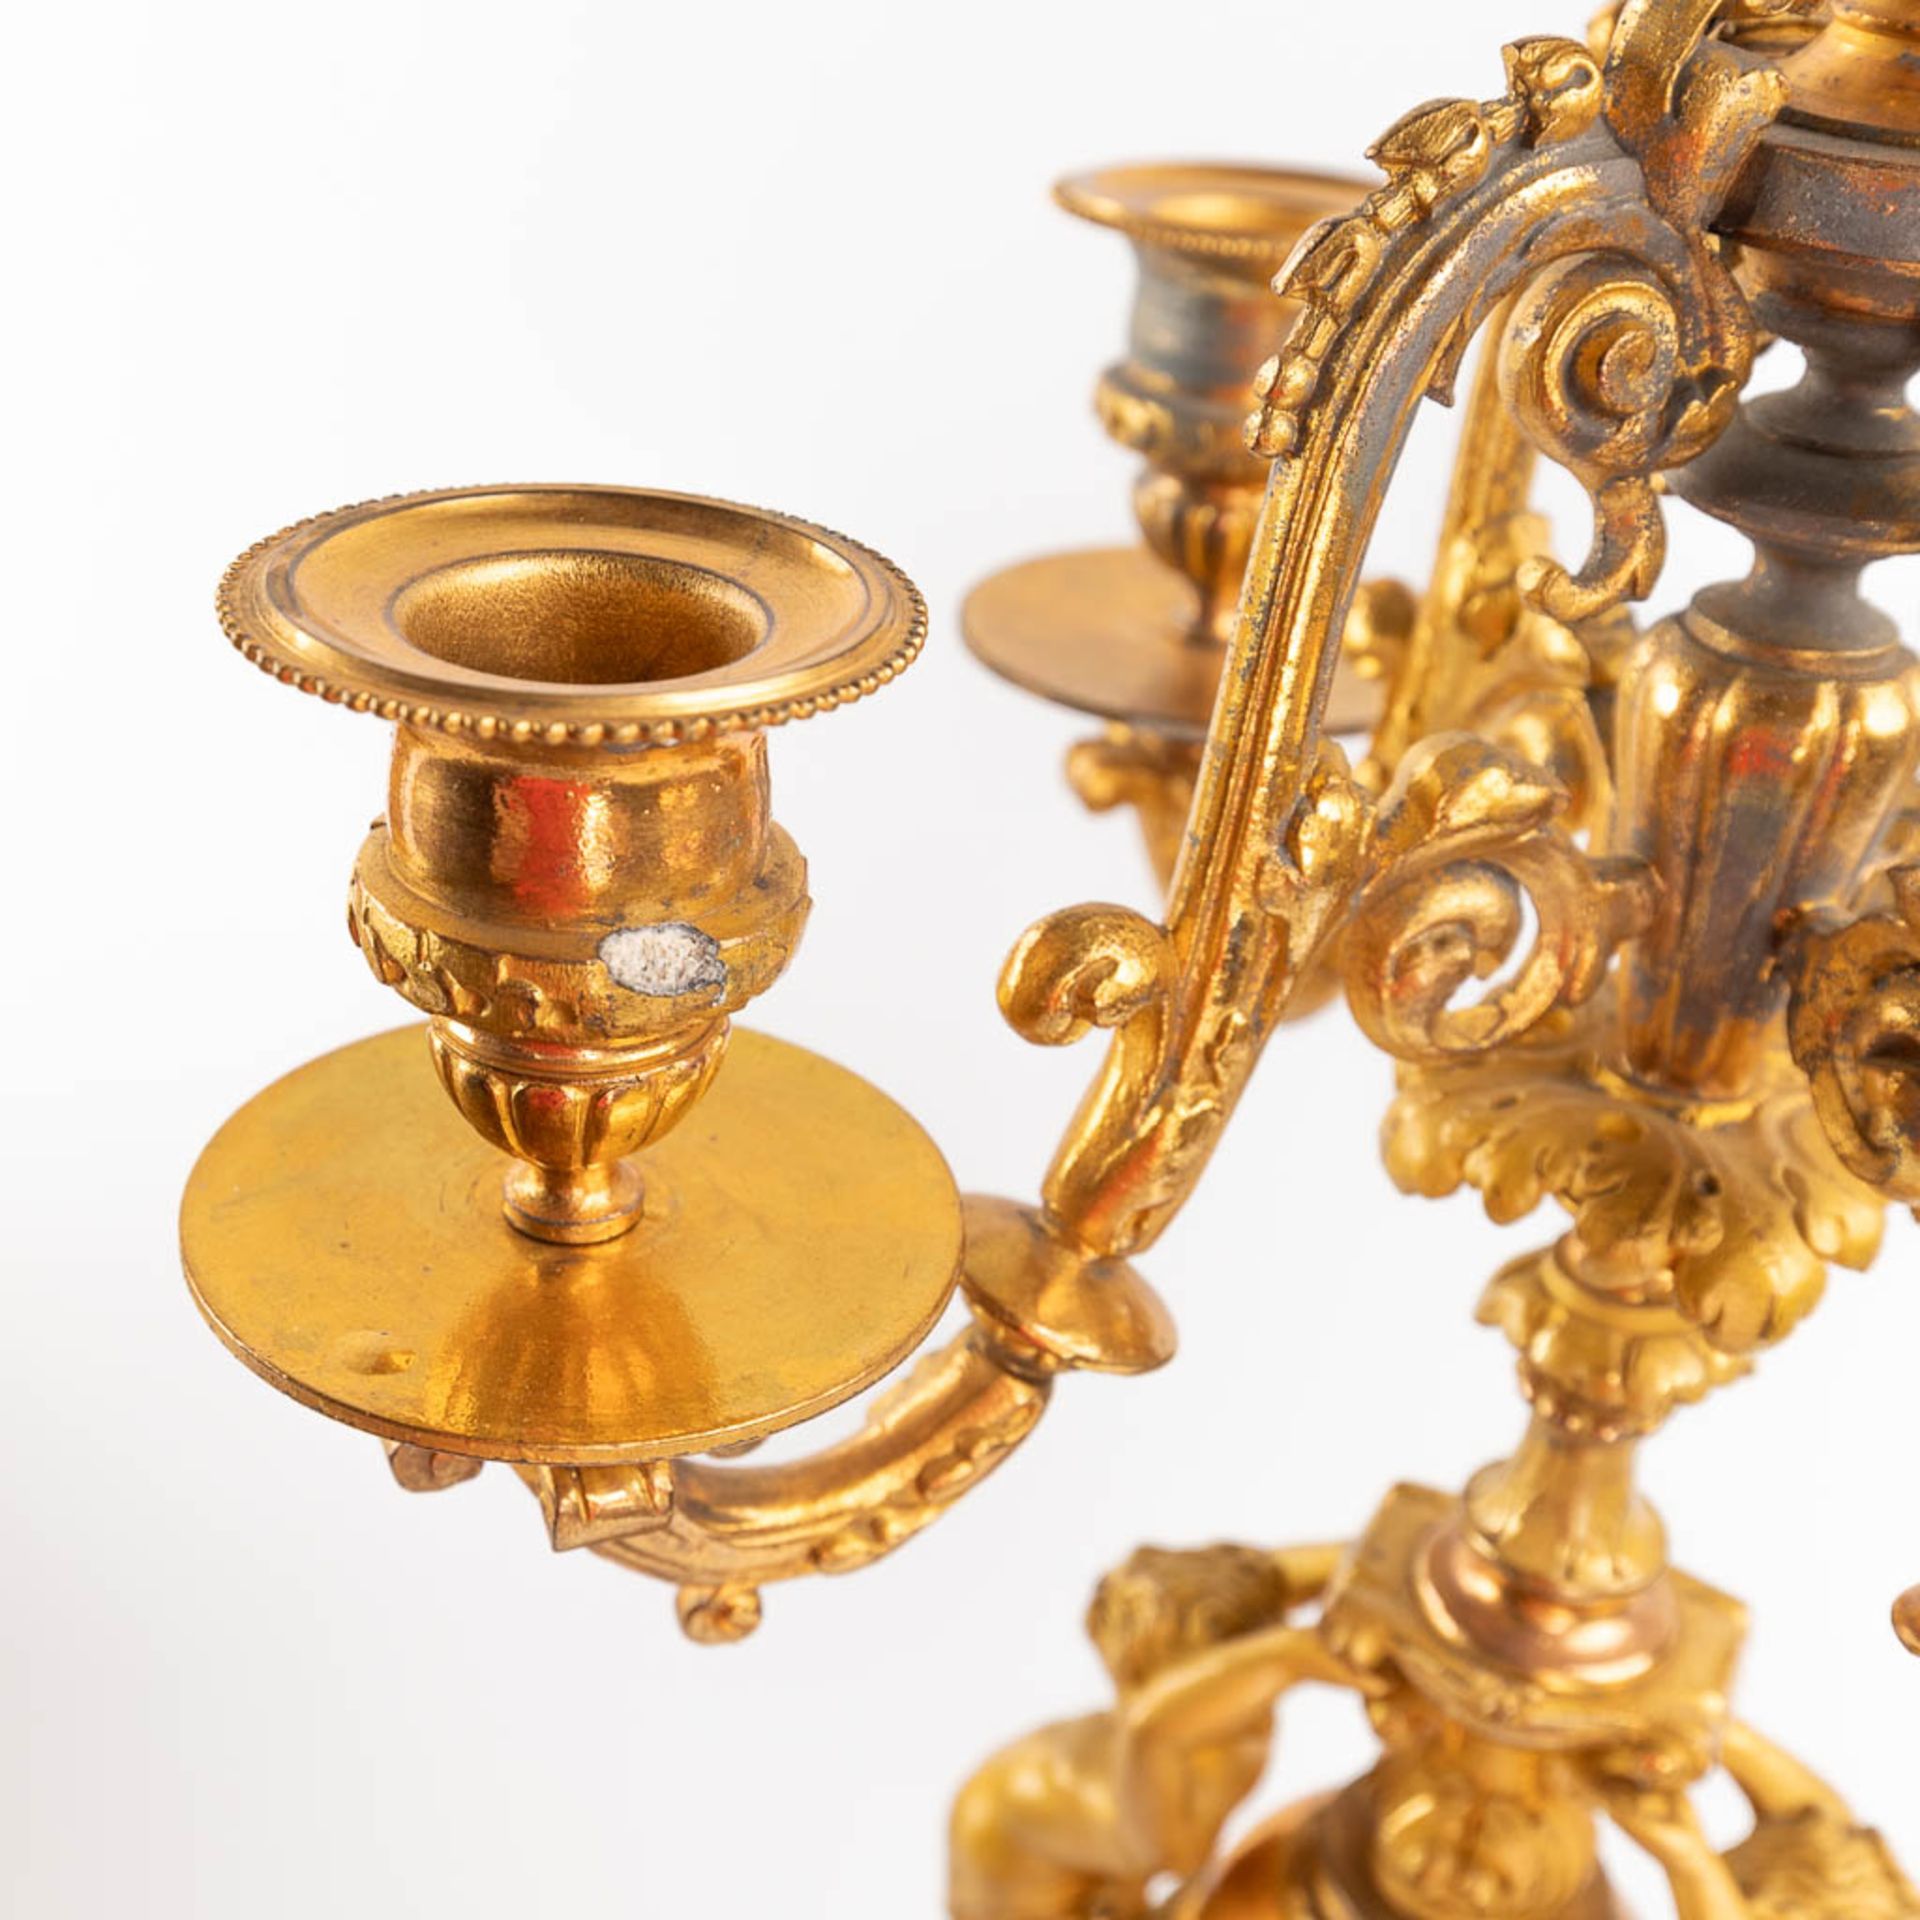 A three-piece mantle garniture clock and candelabra, gilt spelter, decorated with putti. Circa 1900. - Image 10 of 19